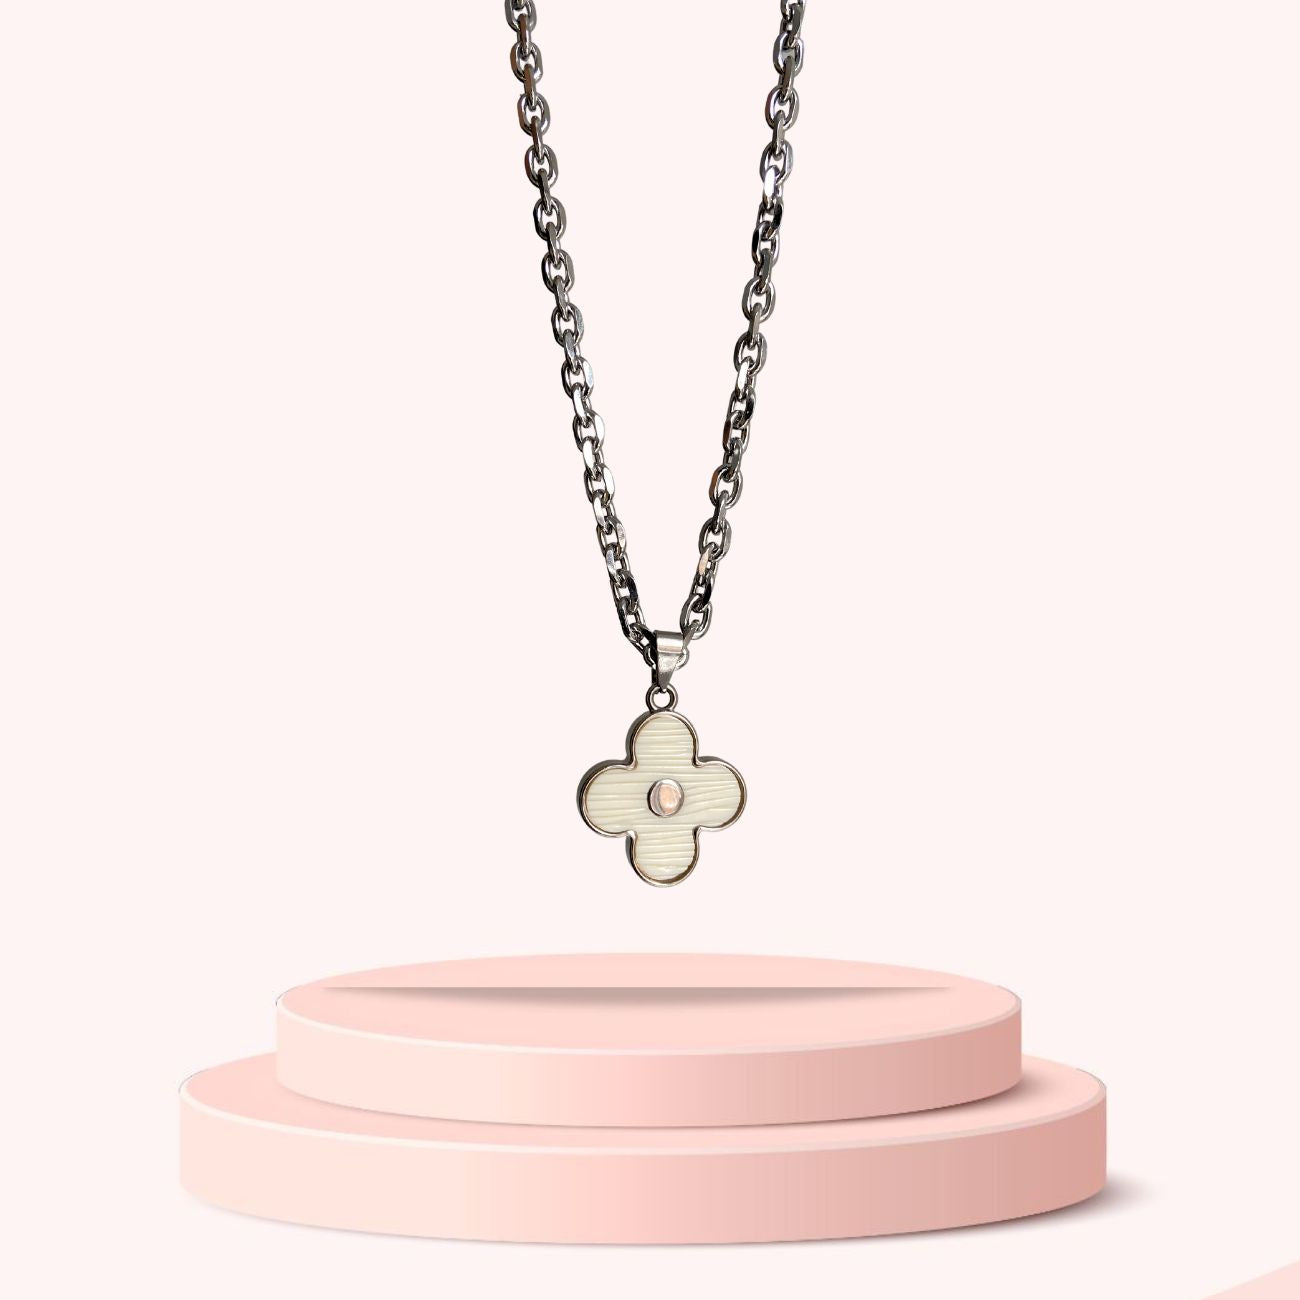 Achara Mother of Pearl Clover Charm Necklace – Charles Fish